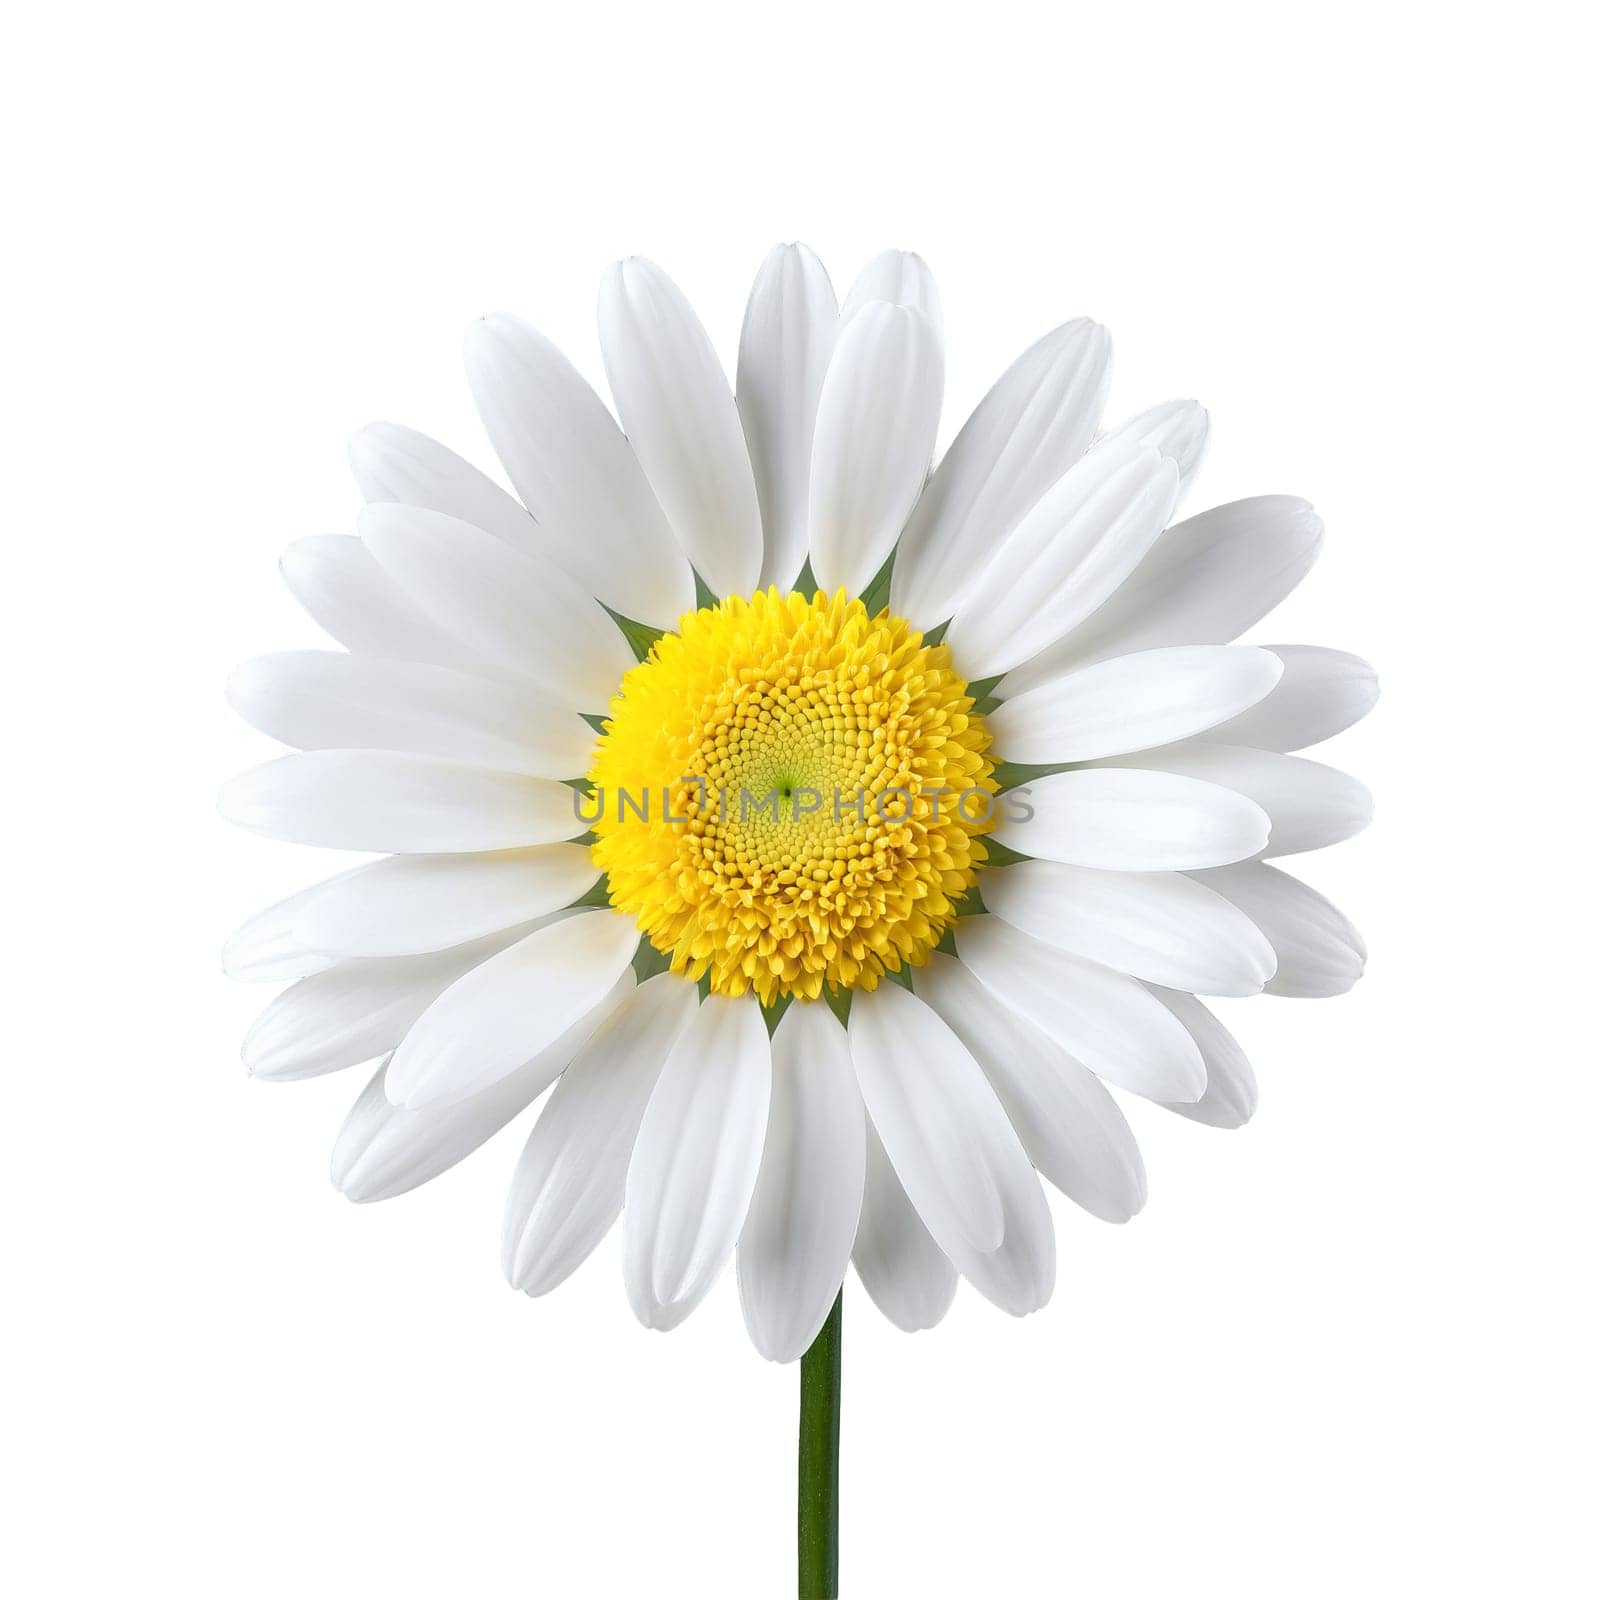 White daisy pristine petals radiating from golden yellow disc florets slightly overlapping Bellis perennis. Flowers isolated on transparent background.